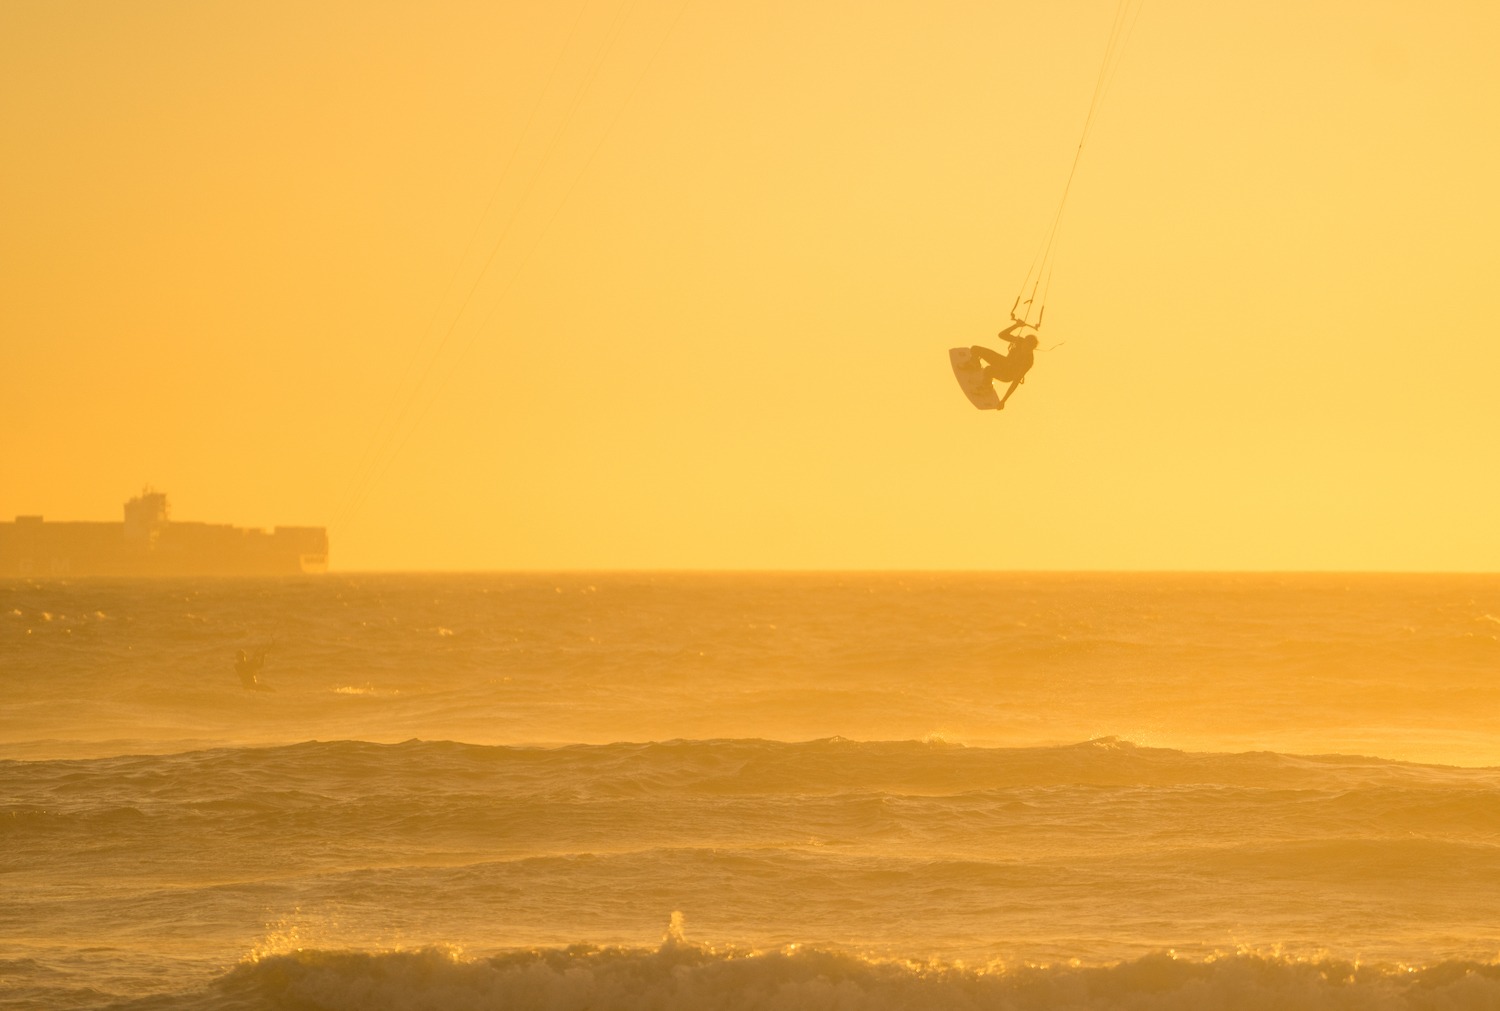 Kiteboarder in the sunset